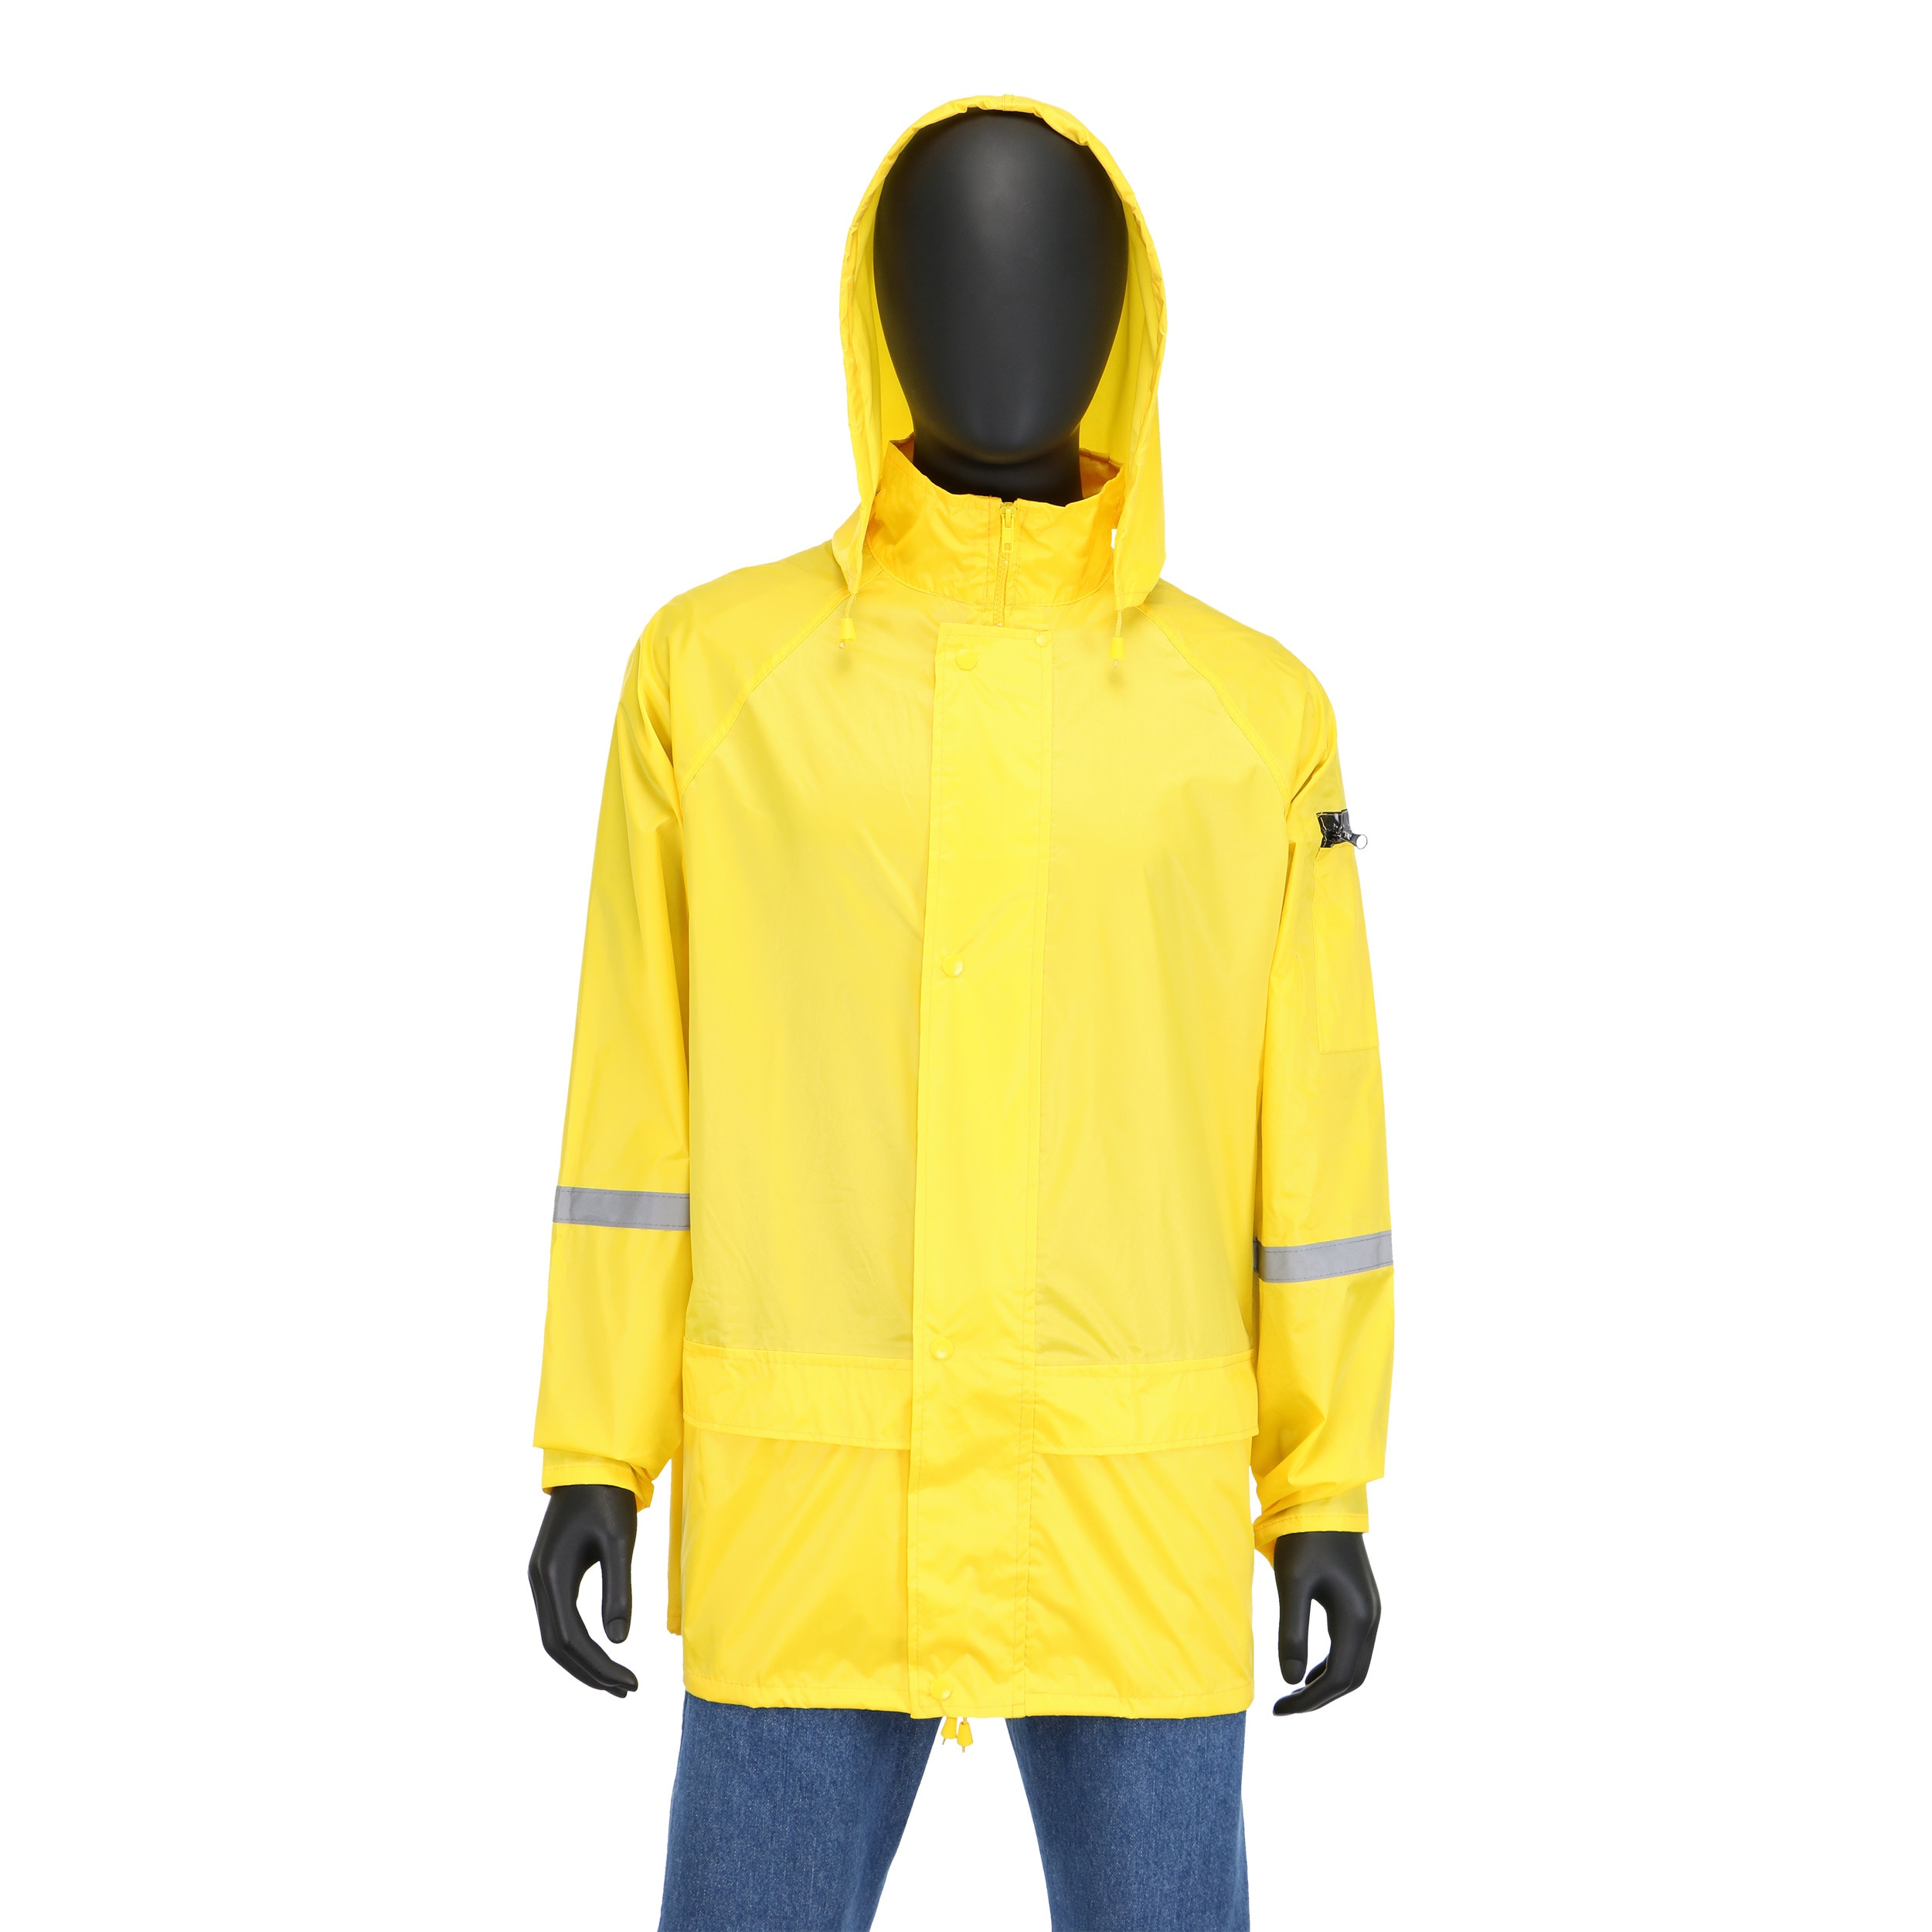 Safety Works Men's Large Yellow Rain Jacket in the Rain Gear 